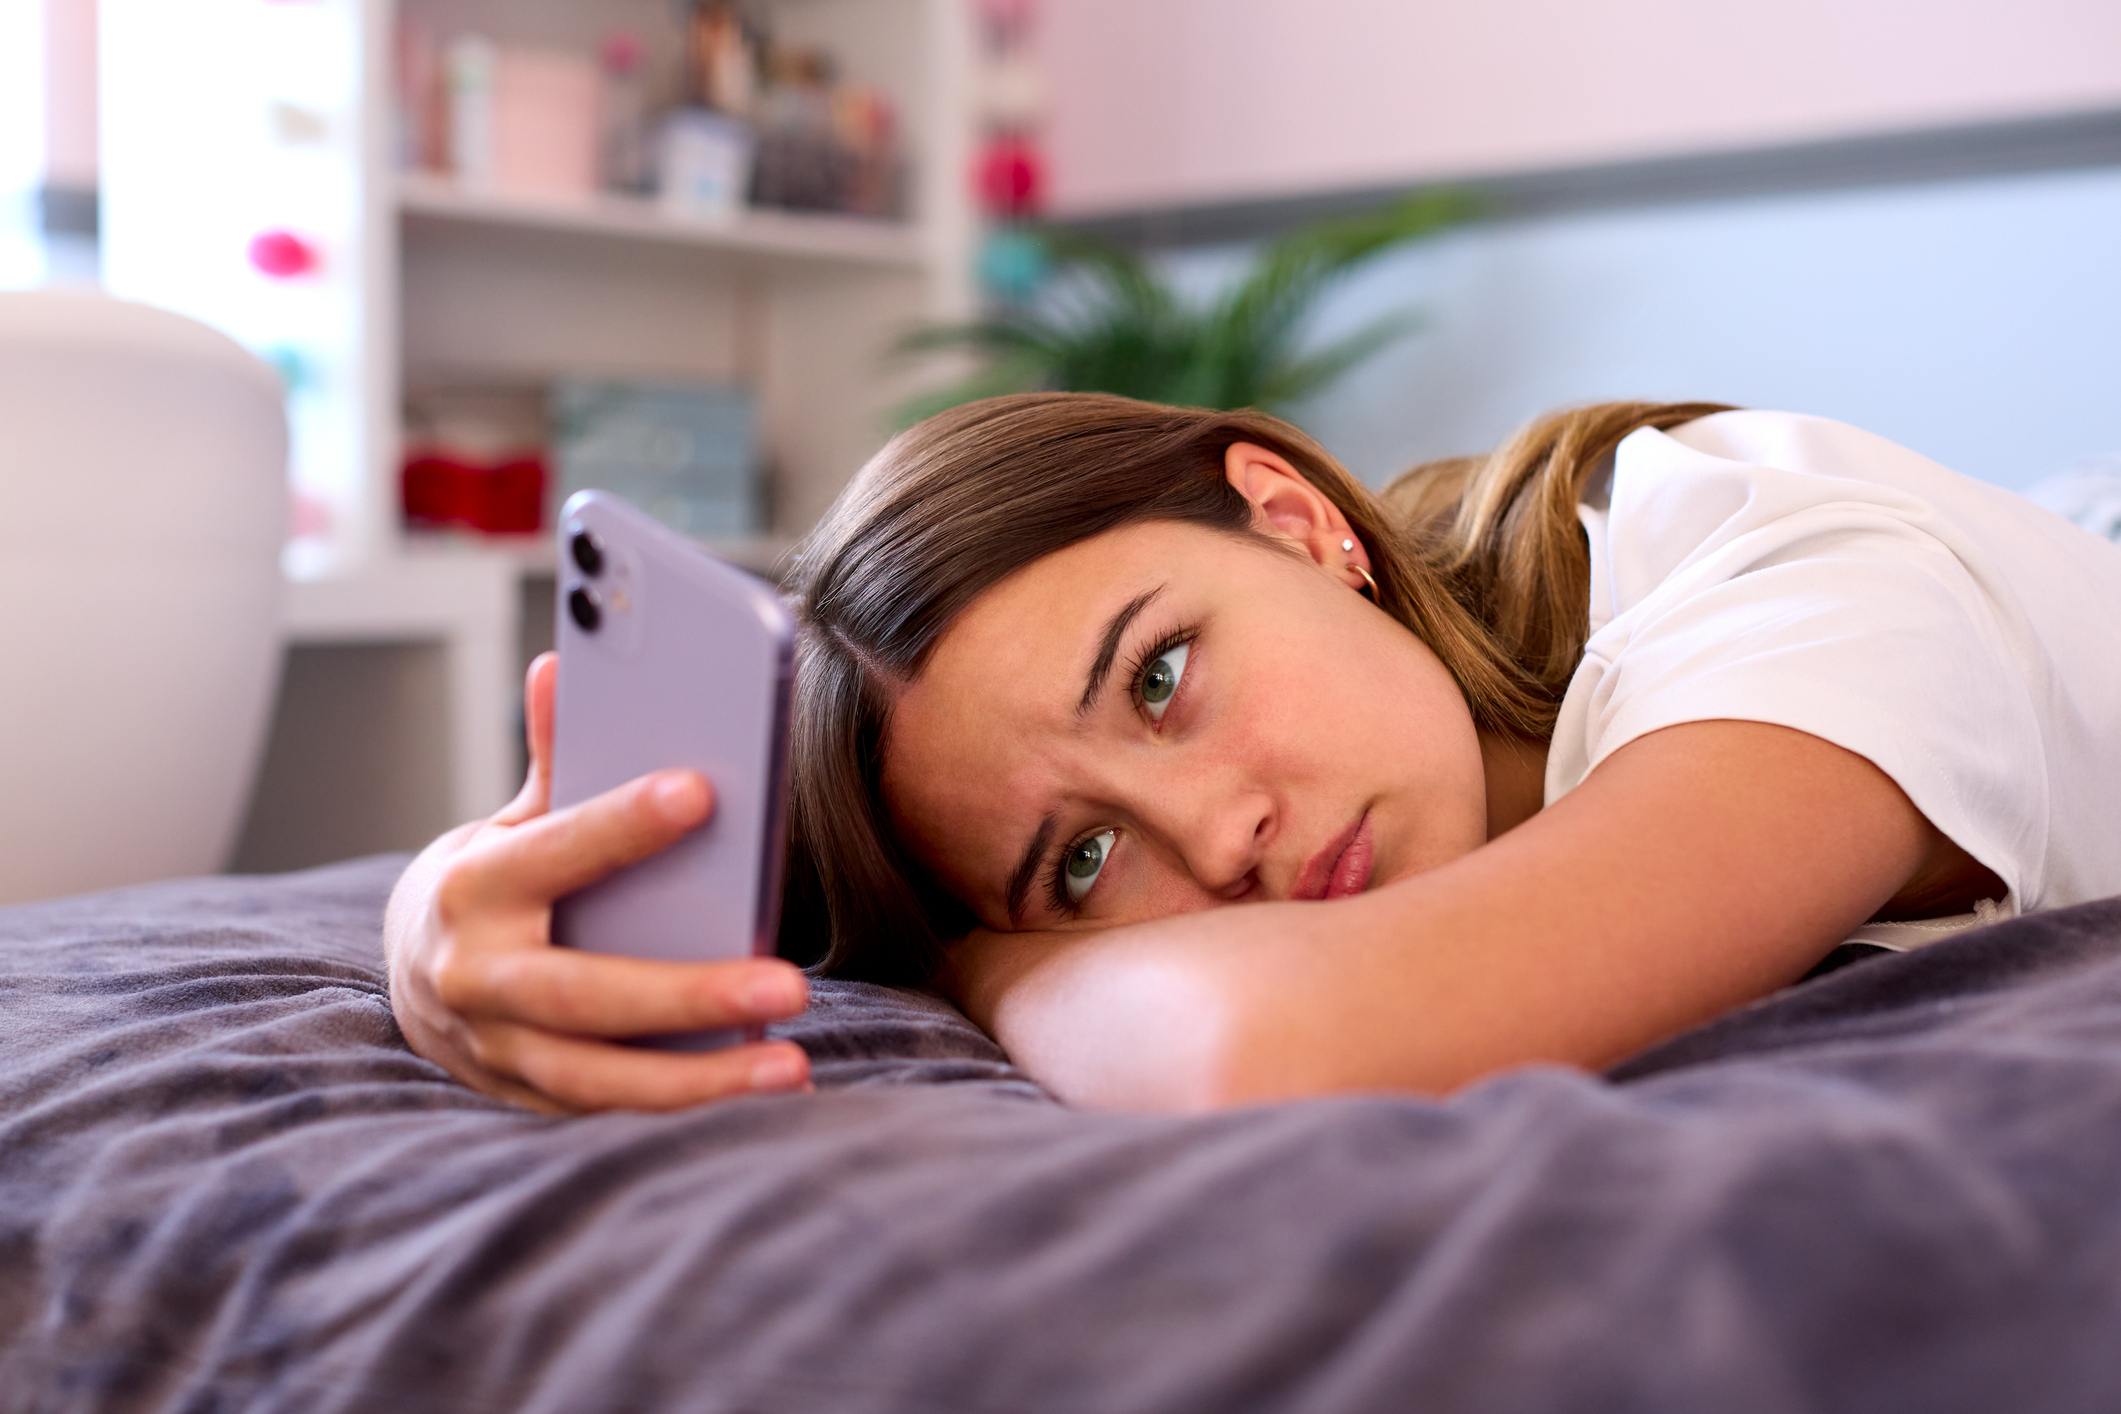 Teens, Social Media, and the Trouble with Self-Diagnosis